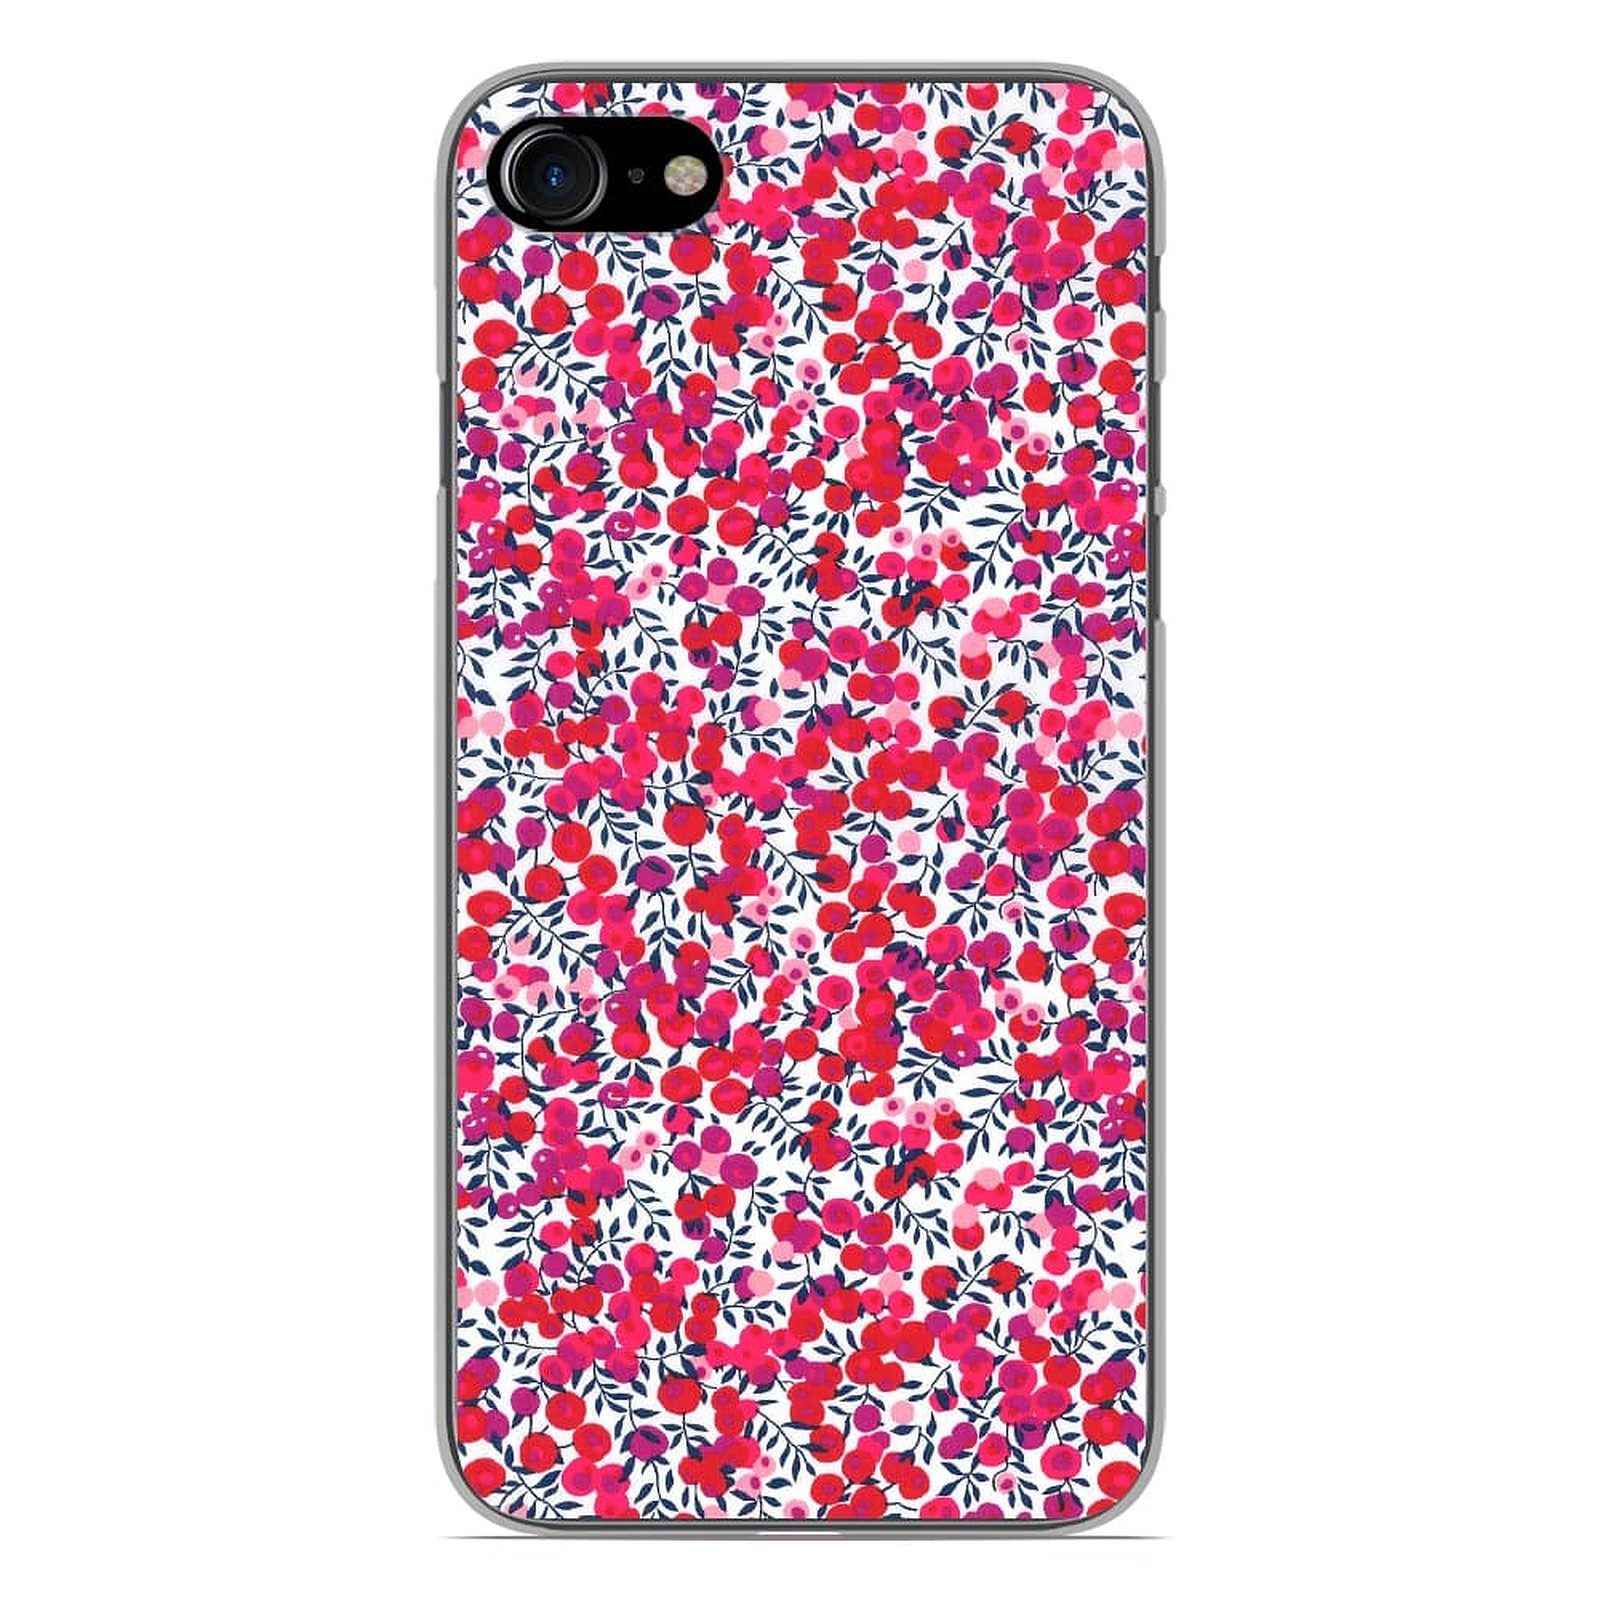 1001 Coques Coque silicone gel Apple iPhone 7 motif Liberty Wiltshire Rouge - Coque telephone 1001Coques